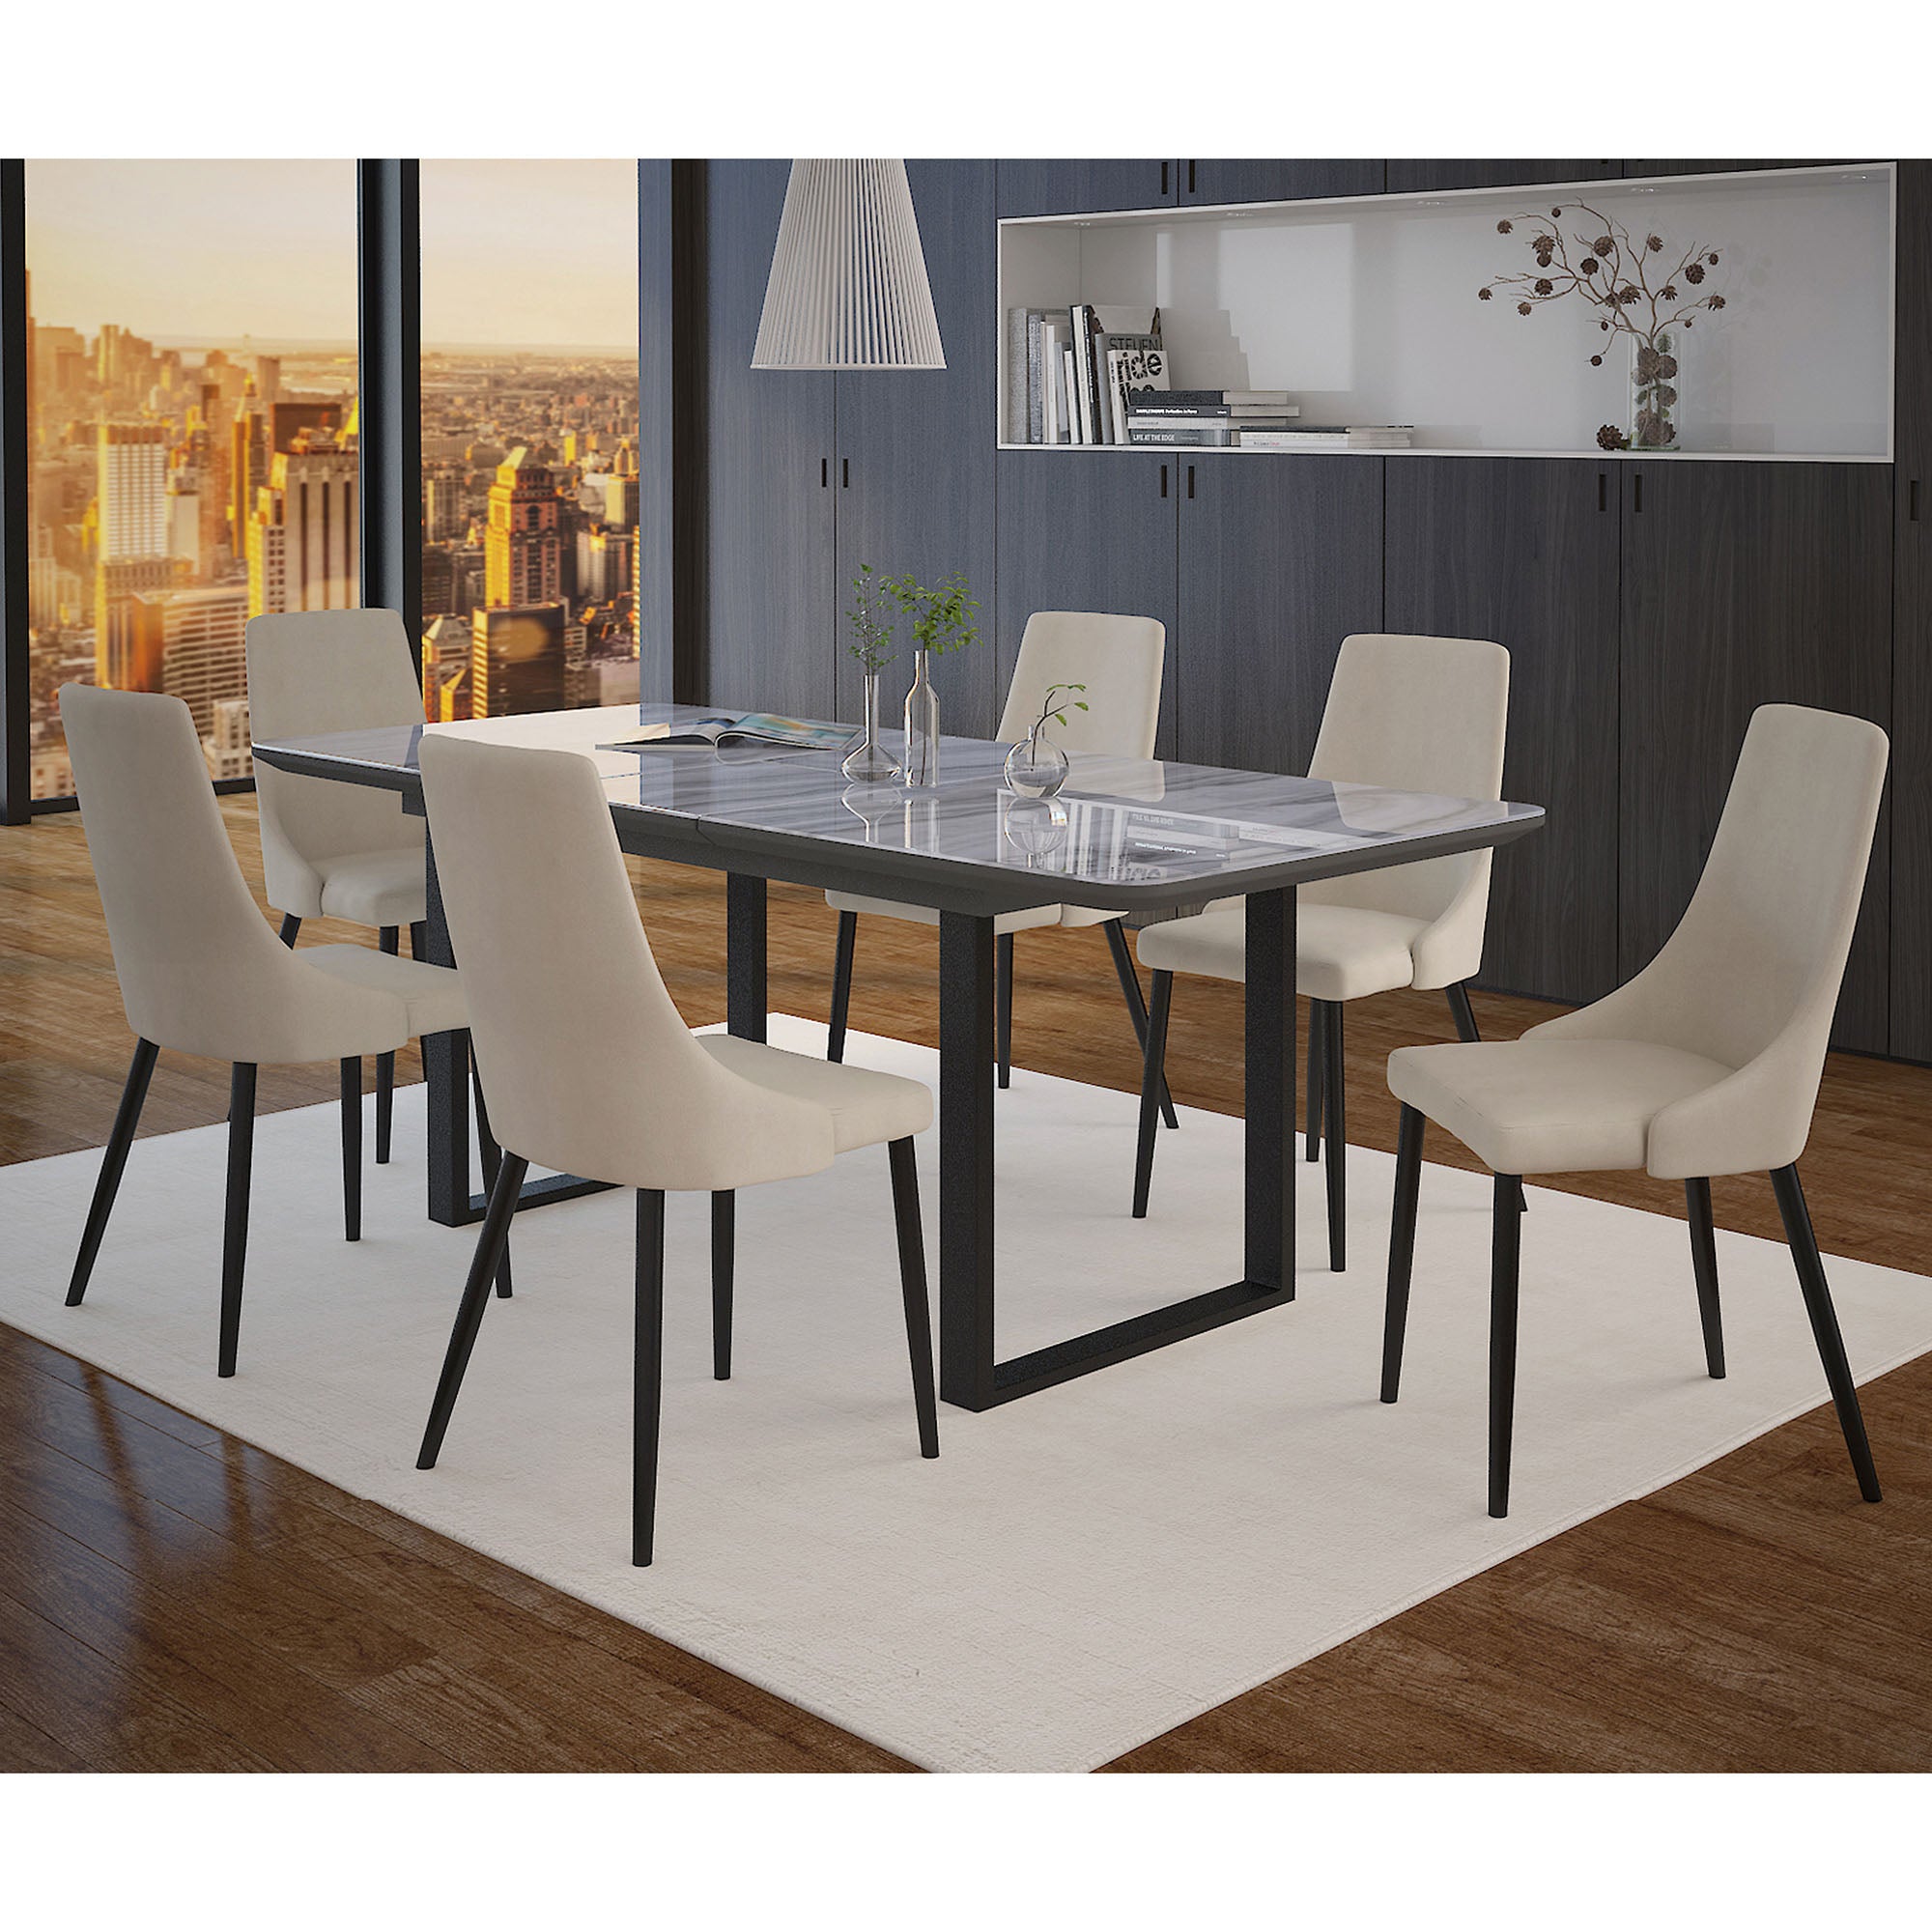 GAVIN-EXTENSION DINING TABLE-BLACK / VENICE BEIGE CHAIRS -7PC DINING SET